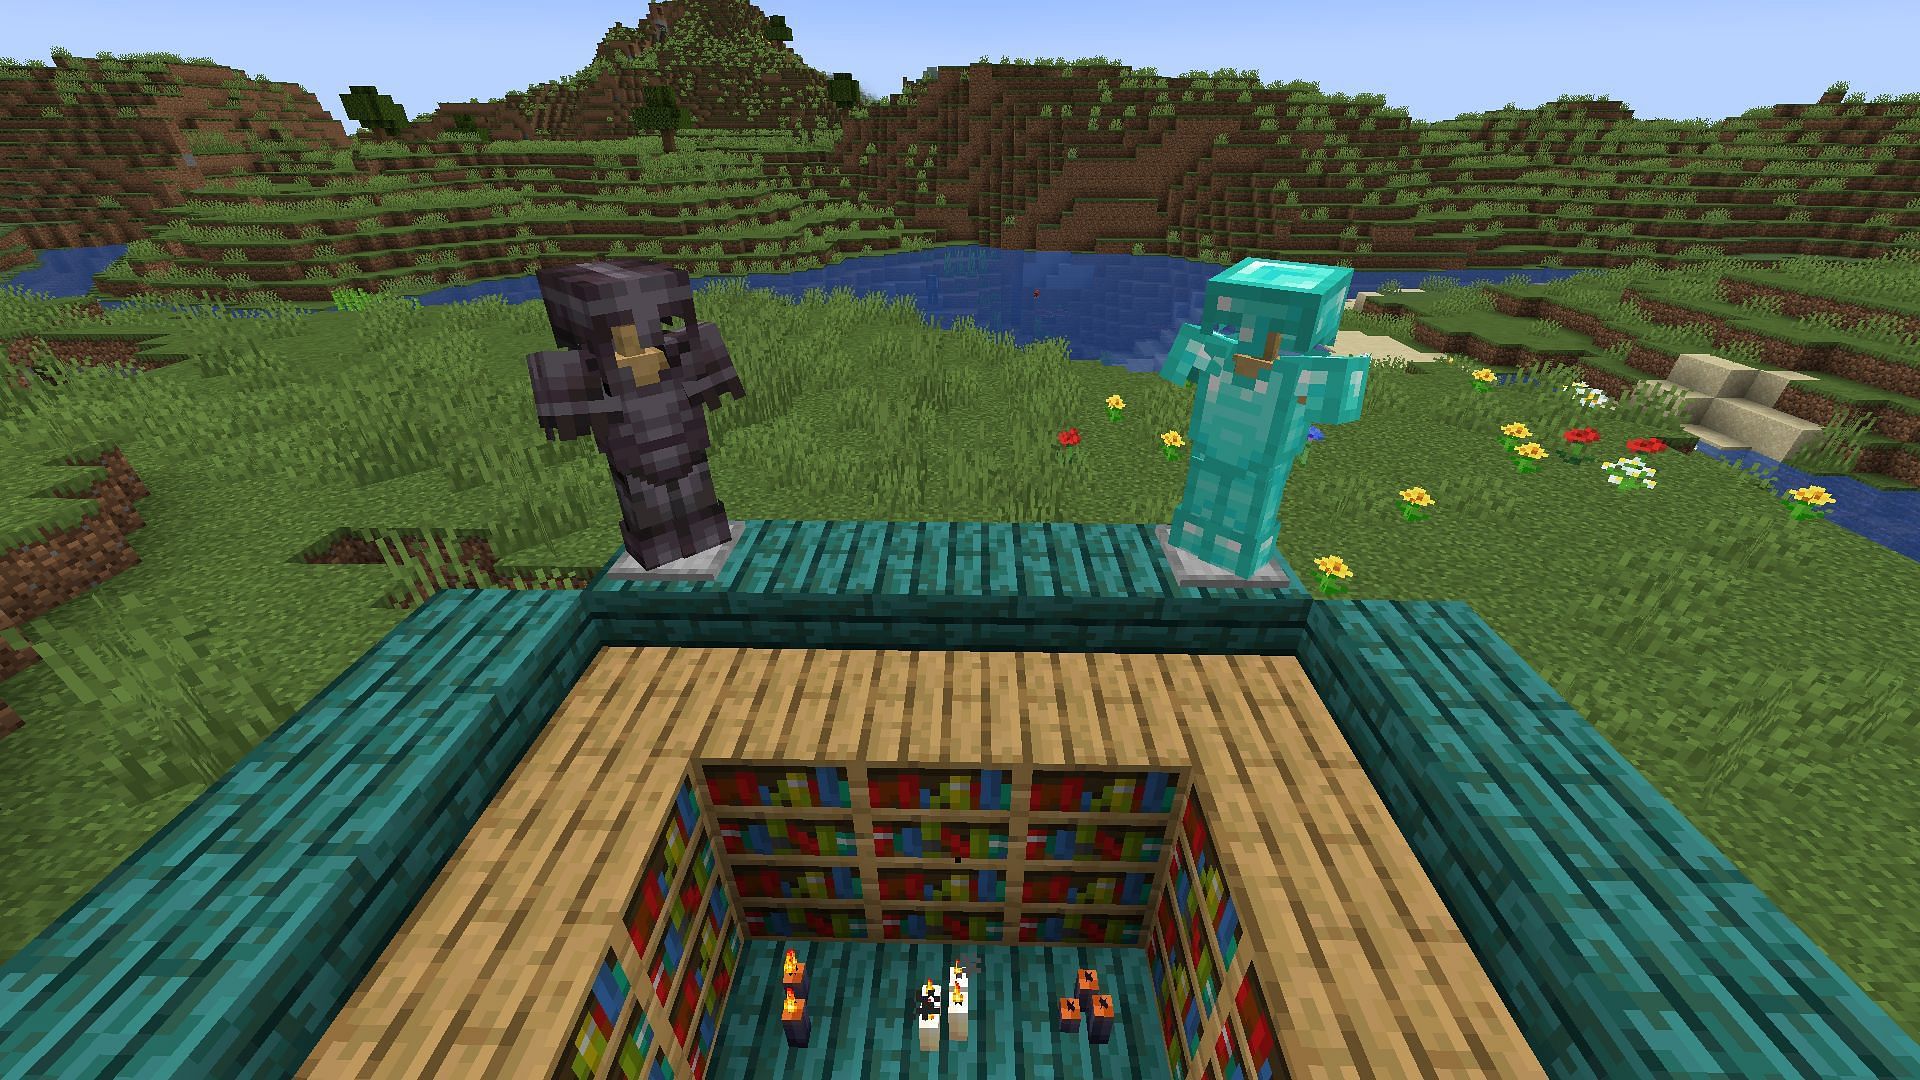 The best armors in the game, diamond and netherite armor, both require diamond to craft (Image via Minecraft)